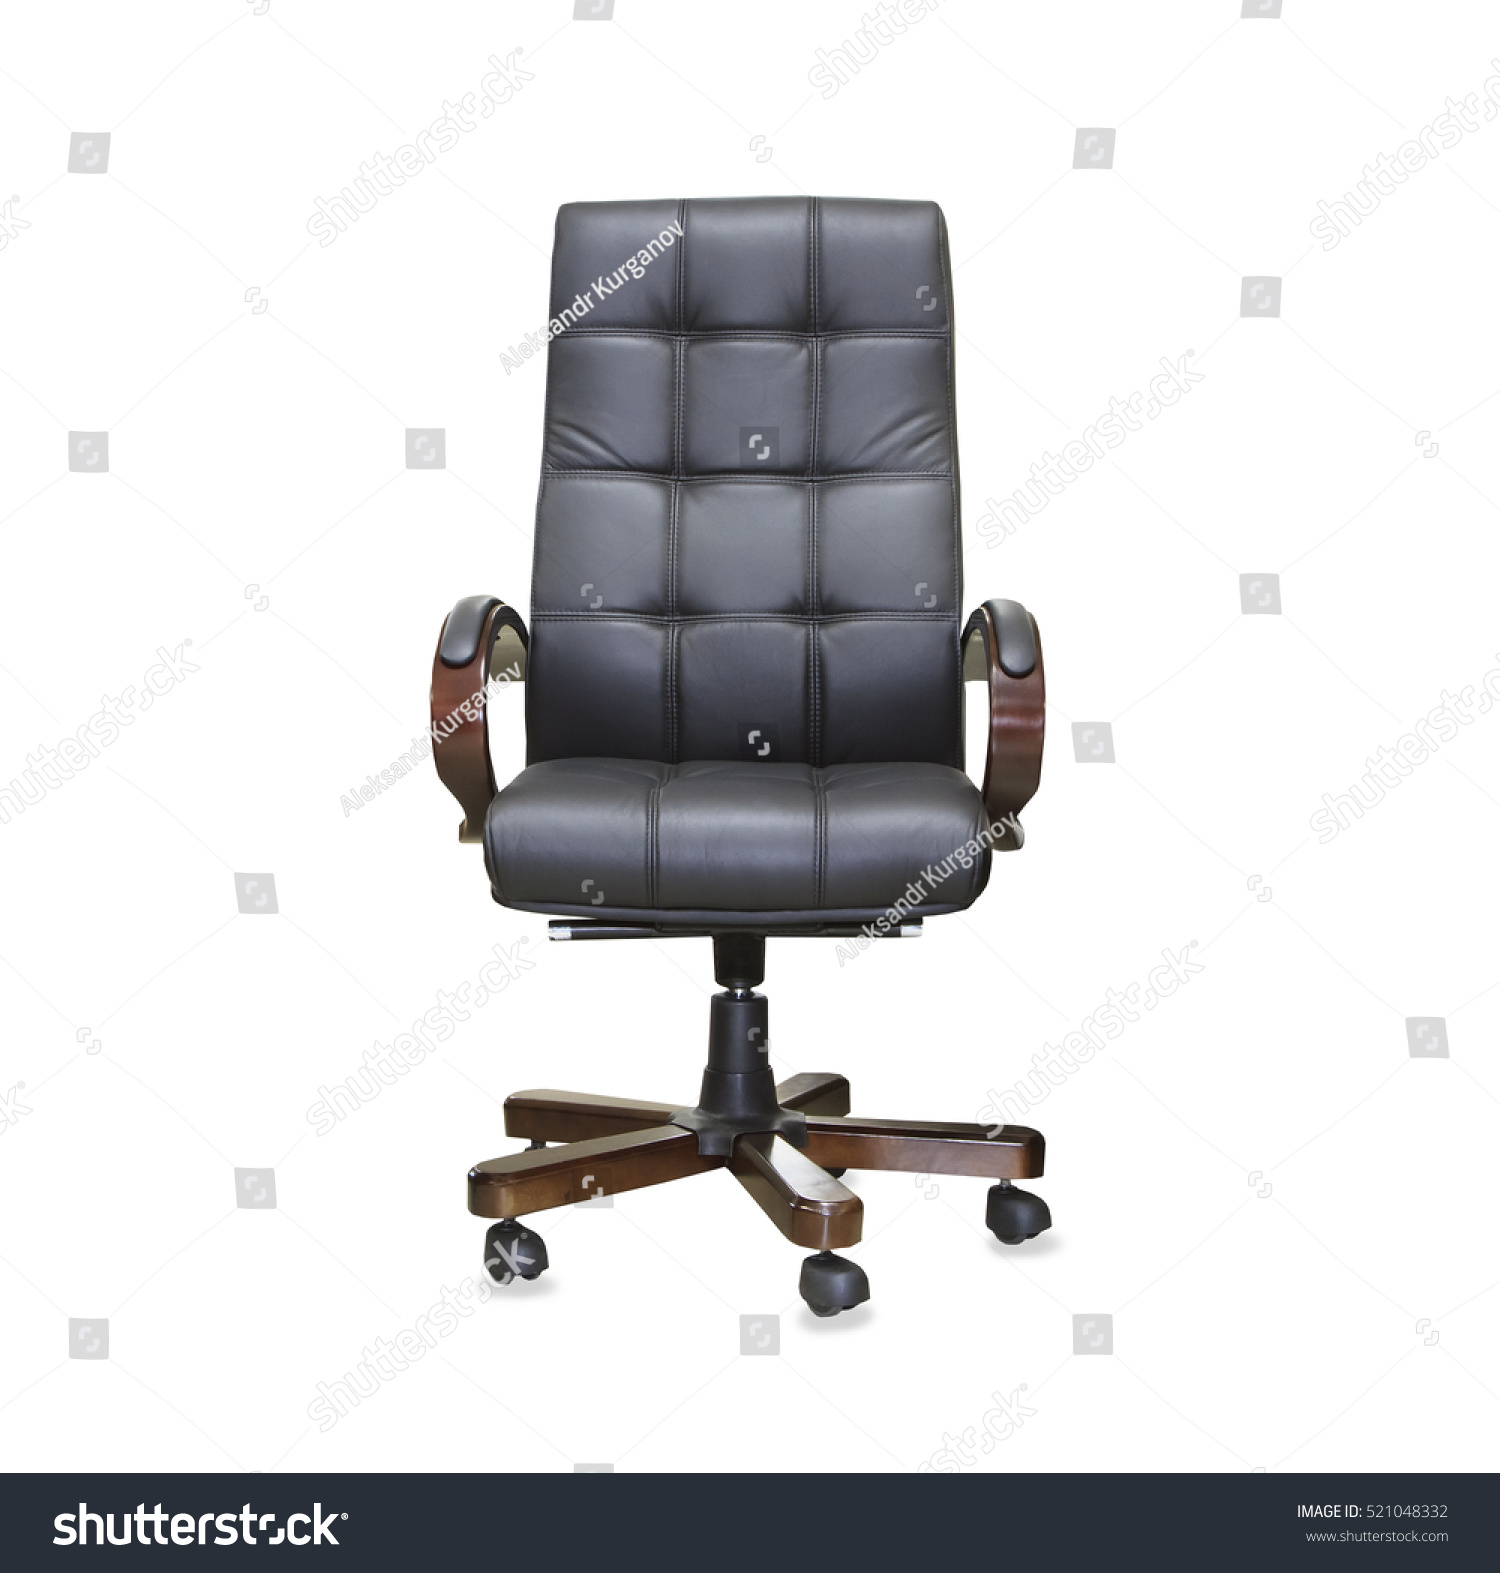 The office chair from black leather. Isolated #521048332